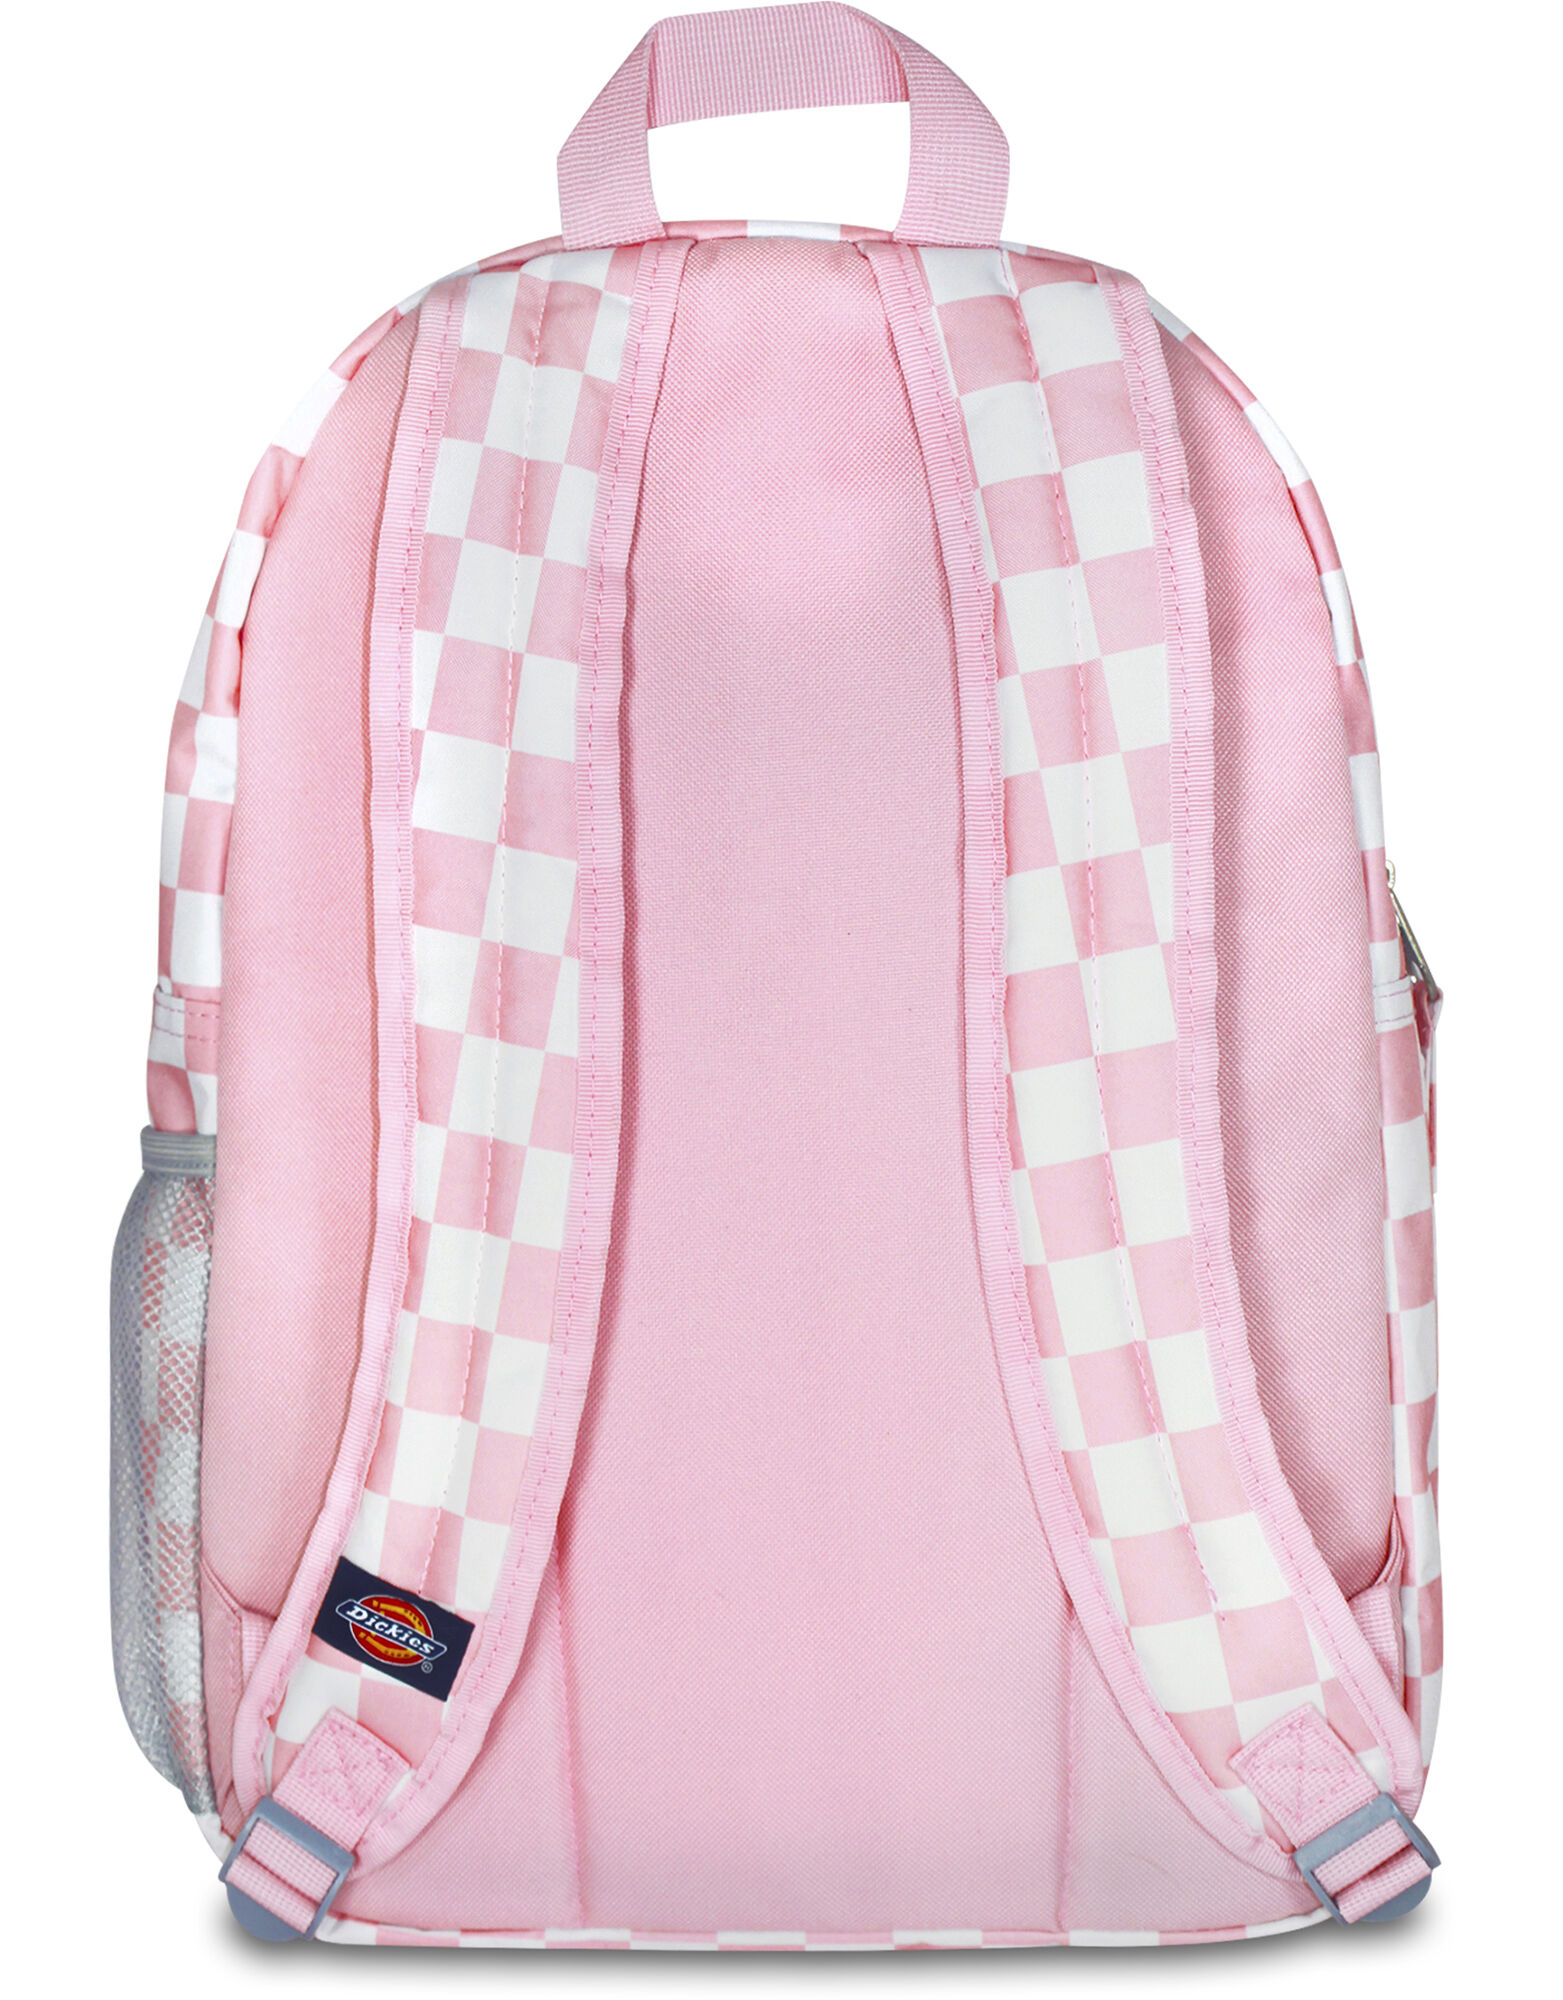 Pink/White Checkered Student Backpack Pink White Checkered One Size| Accessories Bags Backpacks ...